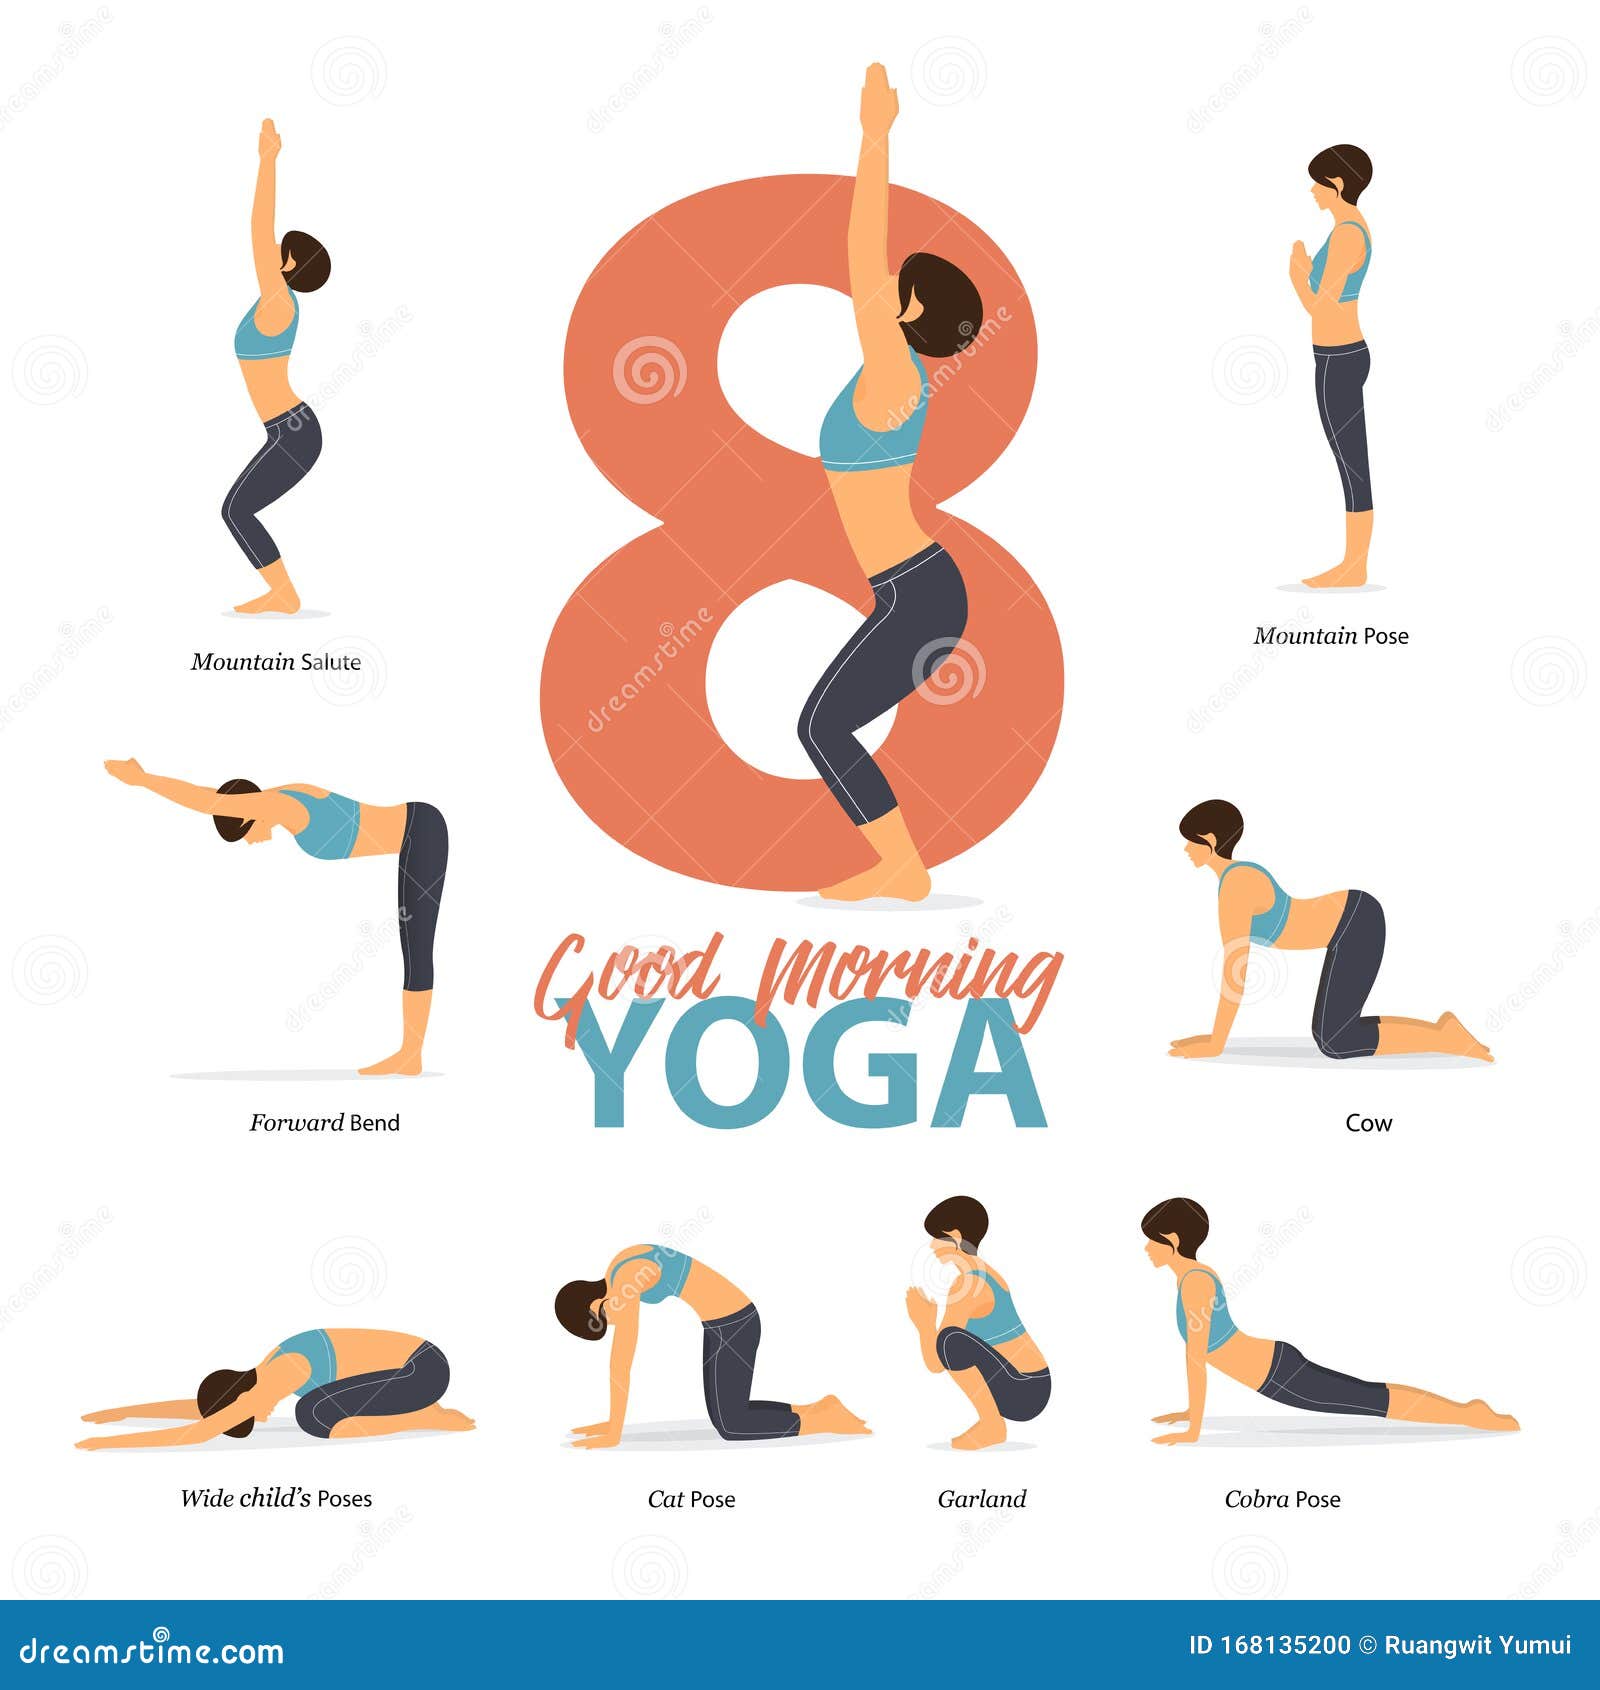 To yoga splits sequence A yoga